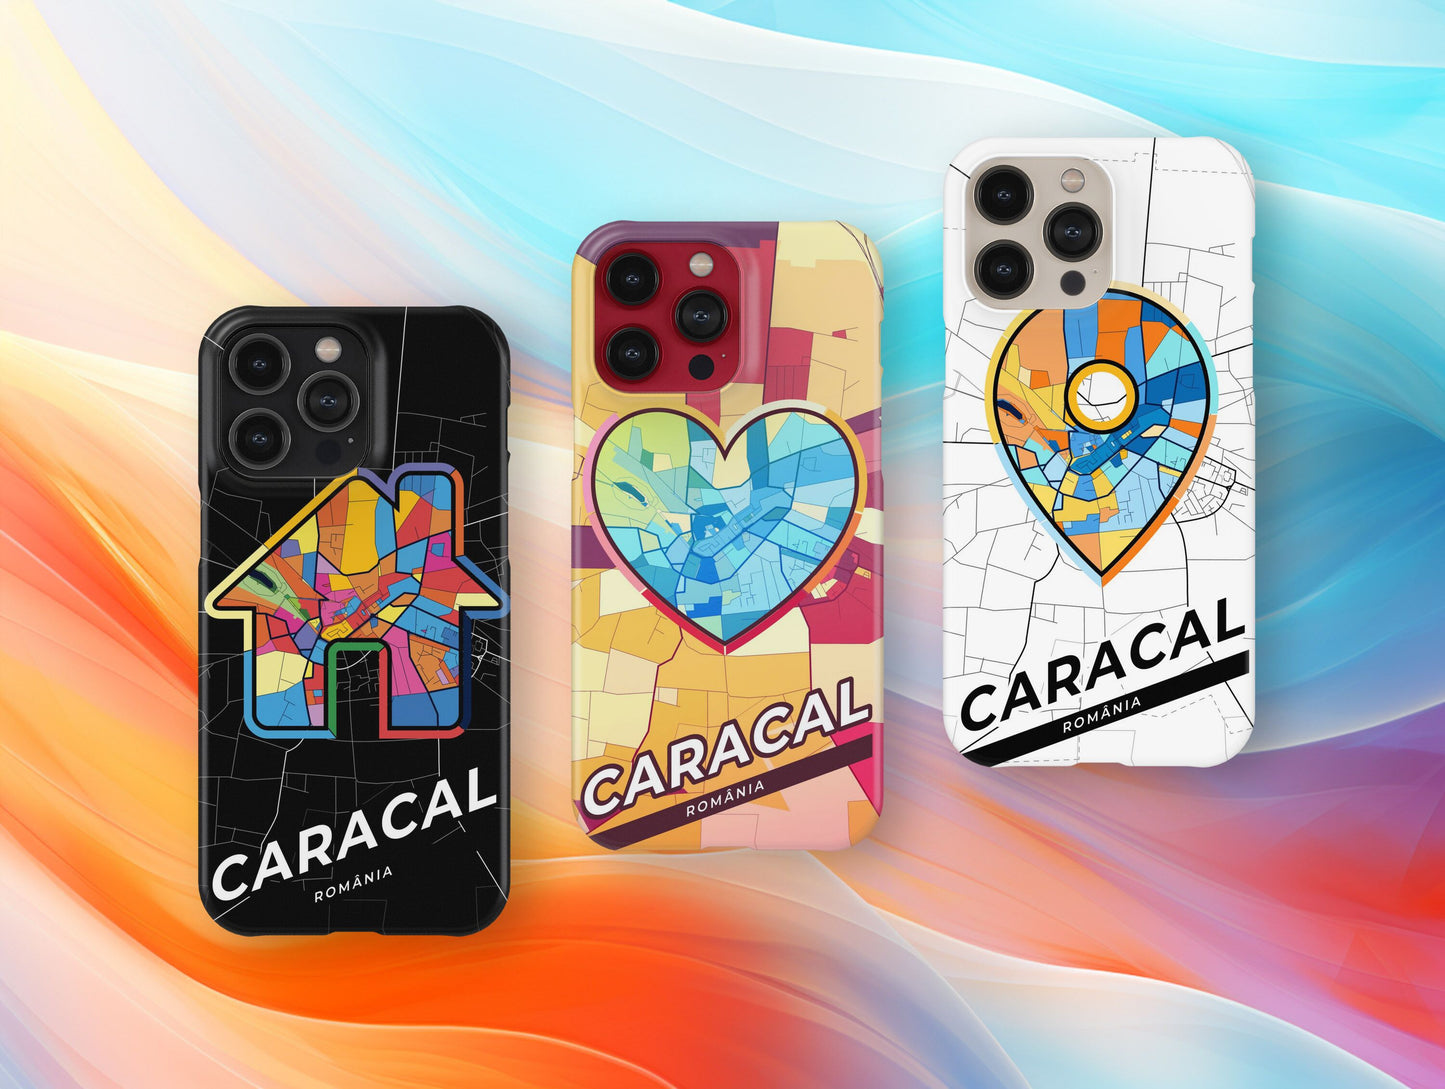 Caracal Romania slim phone case with colorful icon. Birthday, wedding or housewarming gift. Couple match cases.